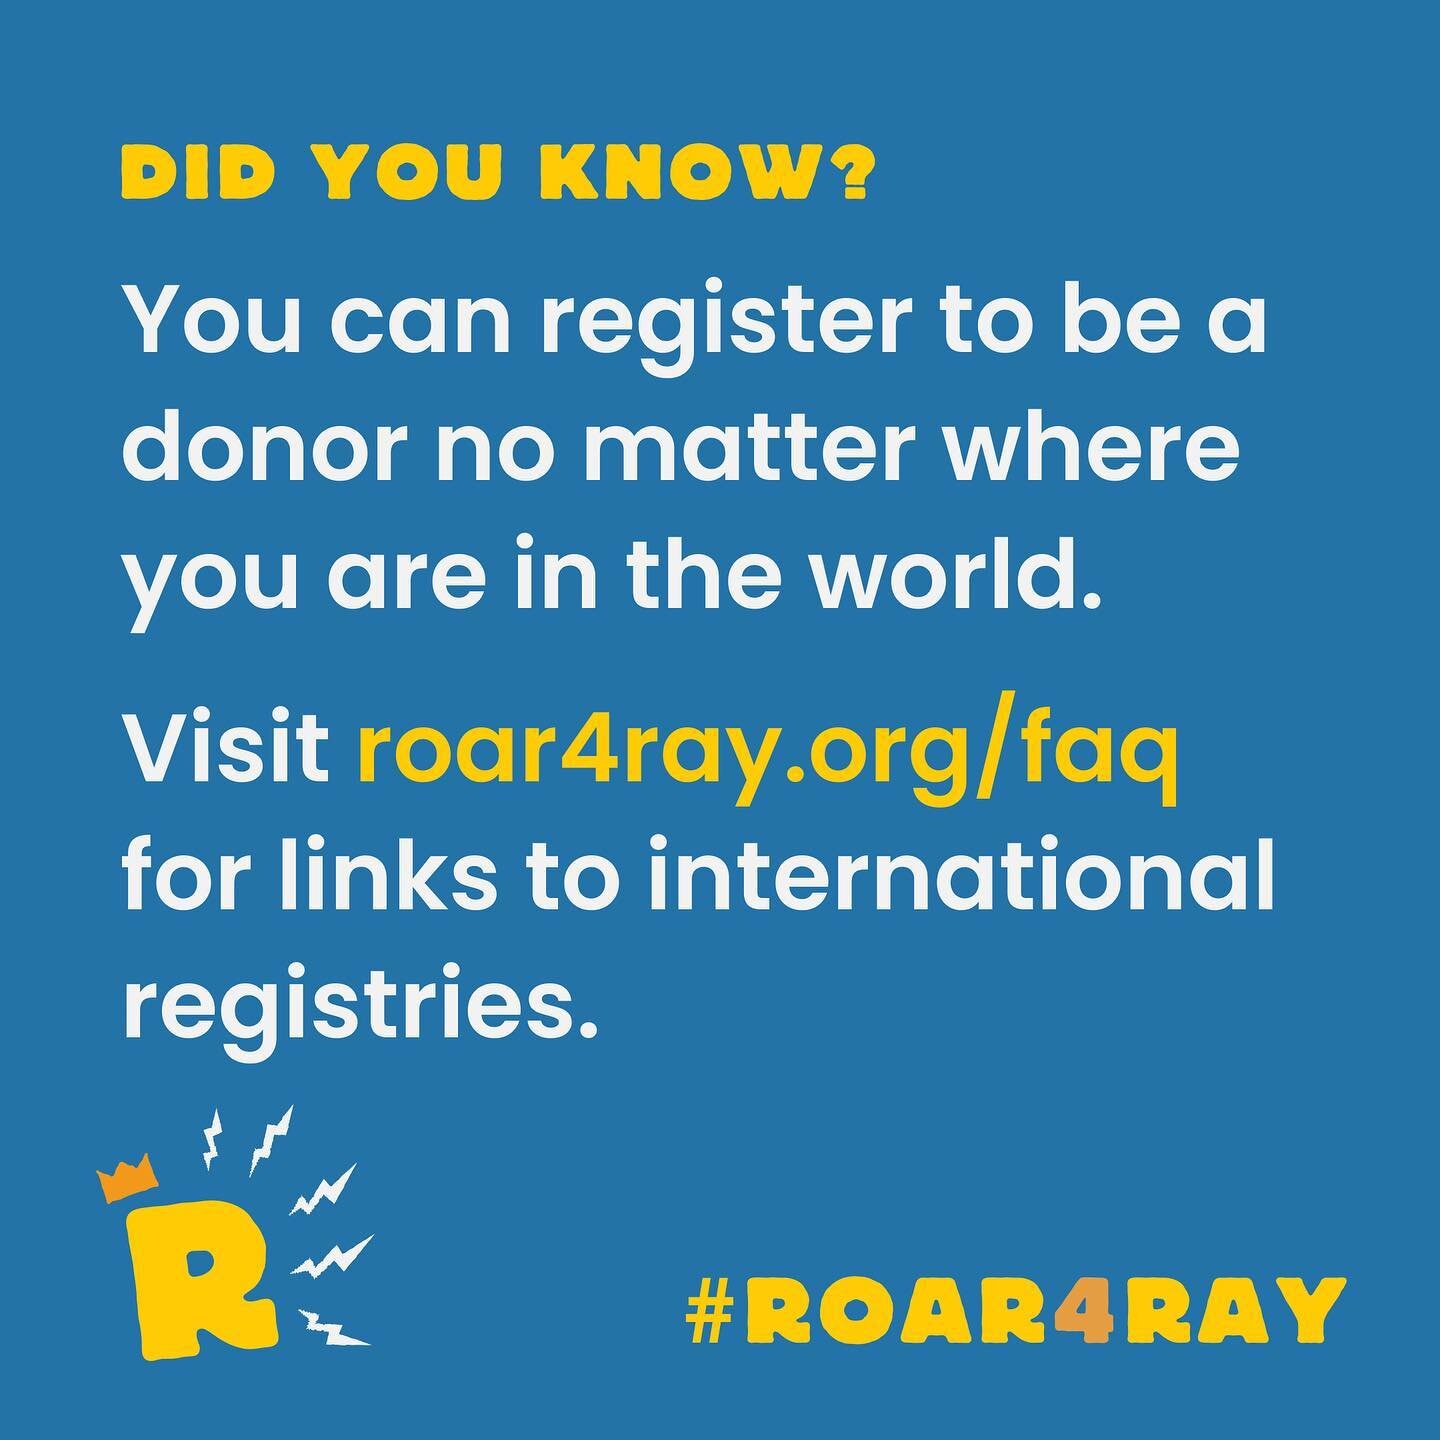 💡DID YOU KNOW?💡 You can be a #Roar4Ray donor anywhere in the world. Visit roar4ray.org/faq for links to international registries.

Enter your country name, look for organization type &ldquo;DR&rdquo; (which stands for donor registry), and then regi